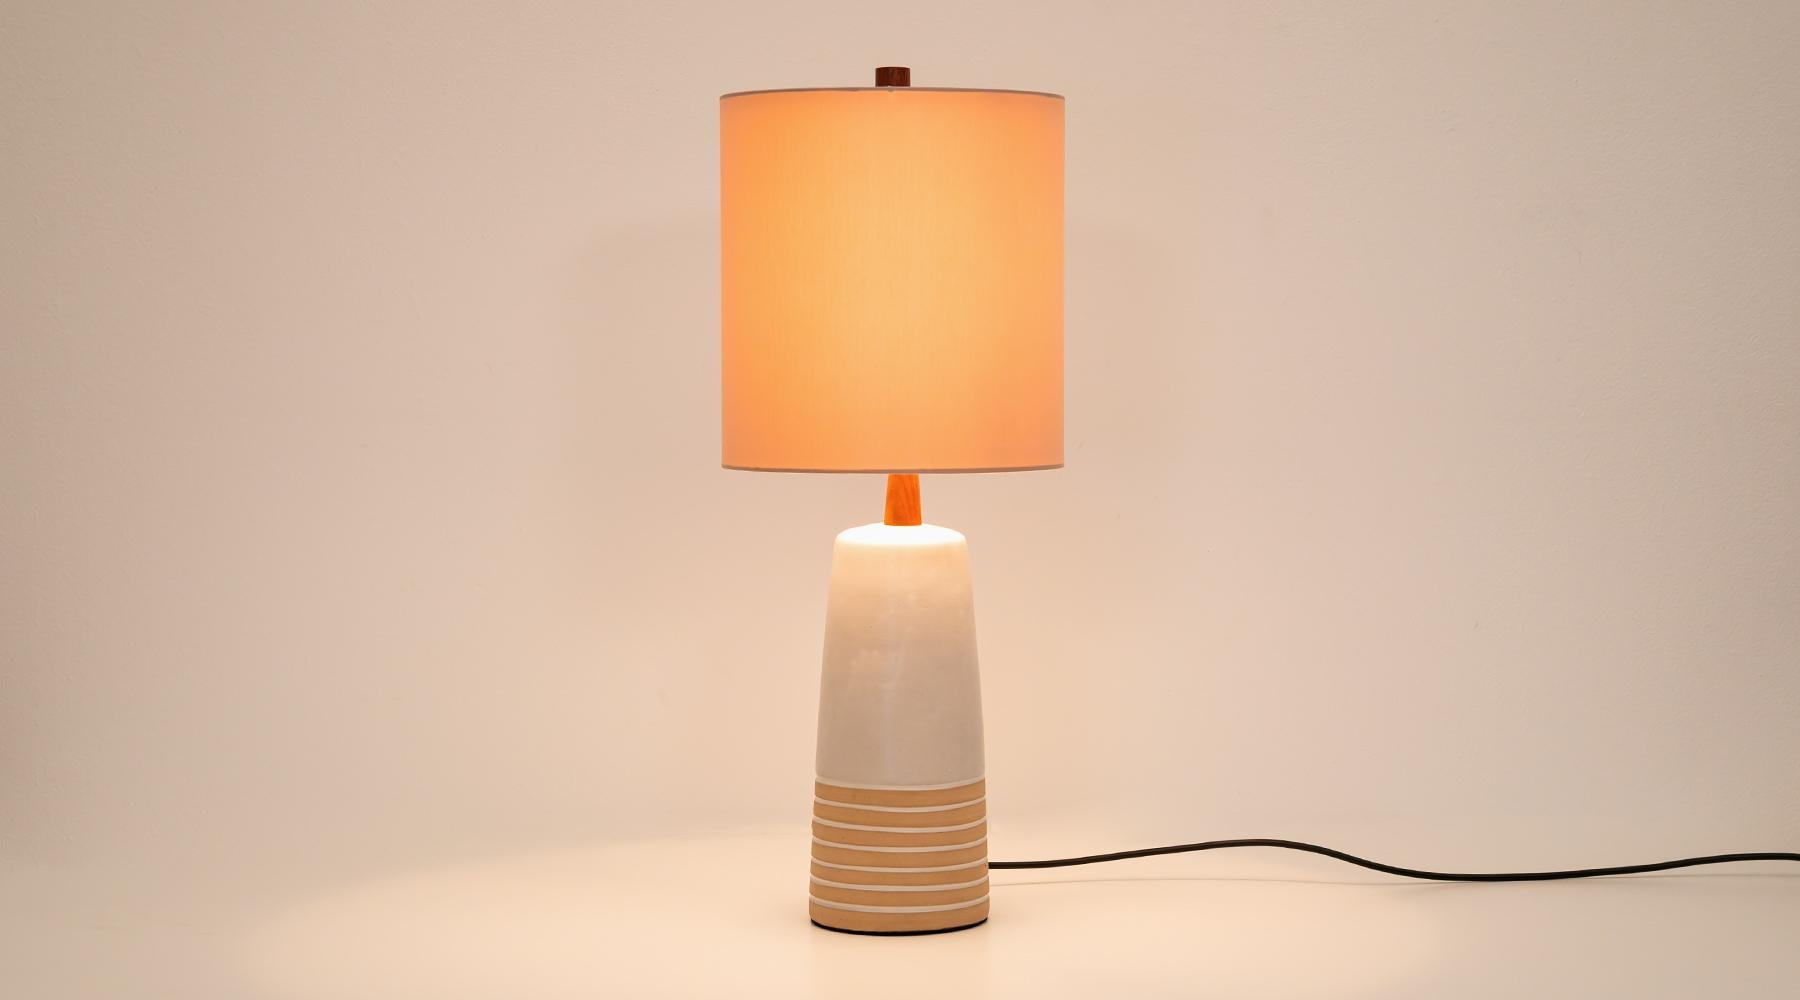 Table lamp, ceramic, sand colors, light shadow, Jane and Gordon Martz, USA, 1954

This smaller example is just one of the unique, handcrafted pieces by Jane & Gordon Martz and comes in excellent condition. The lampshade is directly matched to the